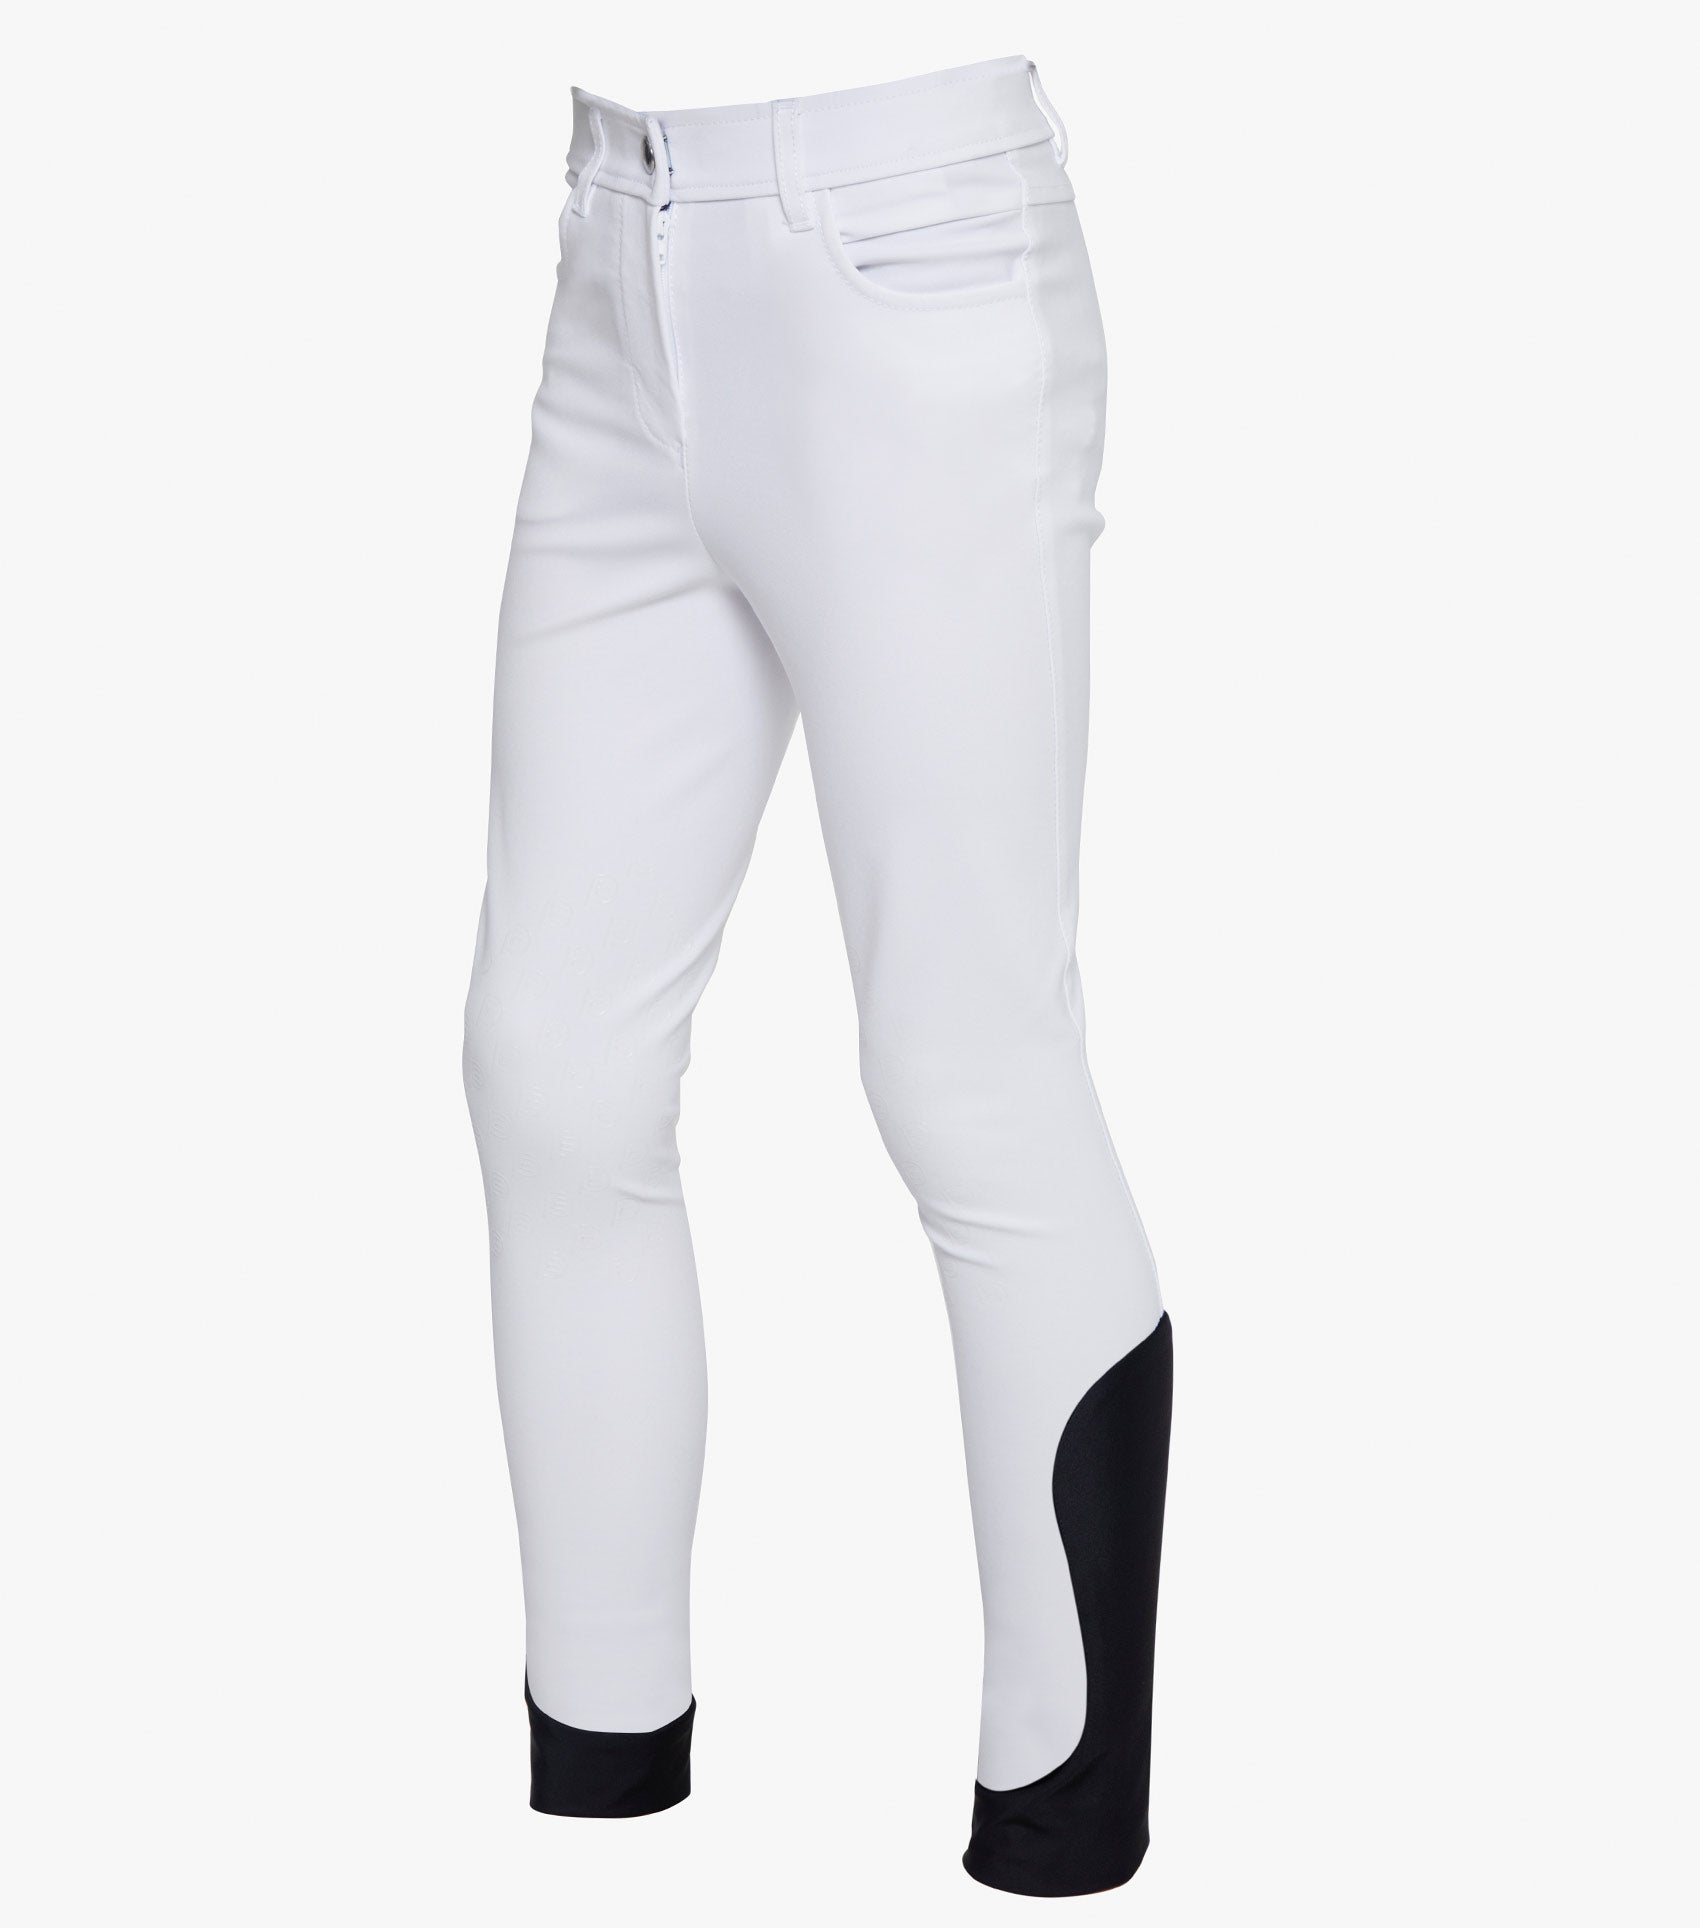 Premier Equine Boys Derby Competition Riding Breeches